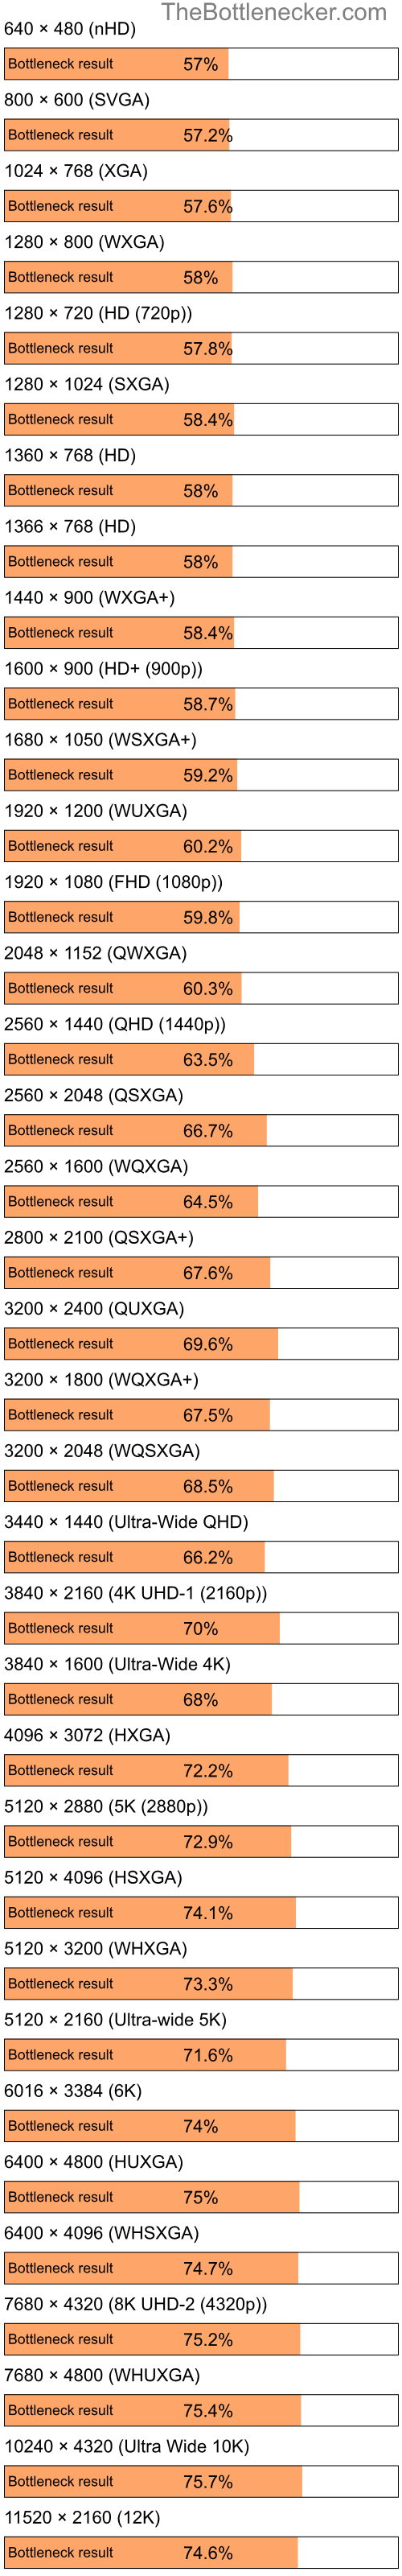 Bottleneck results by resolution for Intel Atom N270 and AMD Radeon X1600 Pro in Processor Intense Tasks